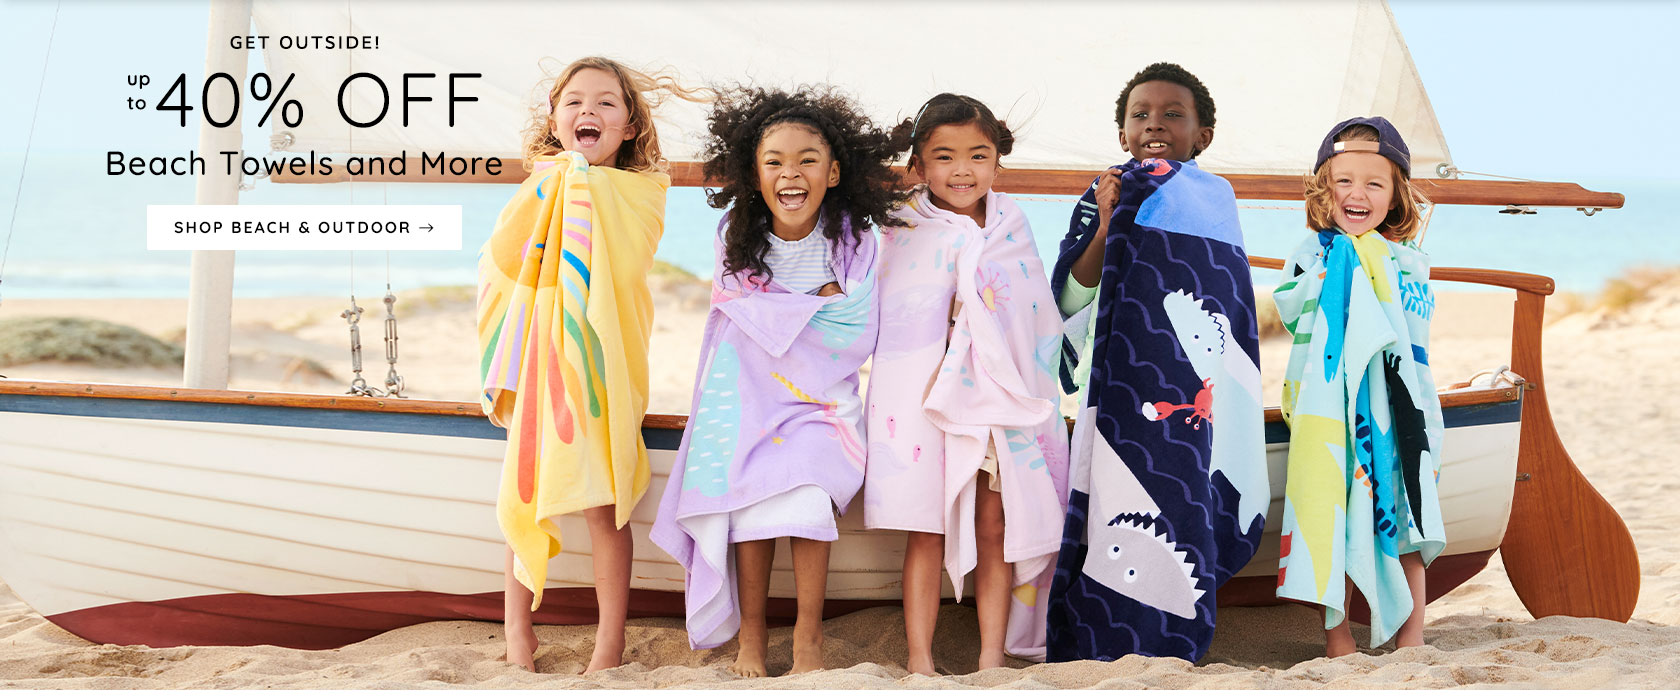 Get Outside! Up to 40% off beach towels and more - Shop Beach & Outdoor